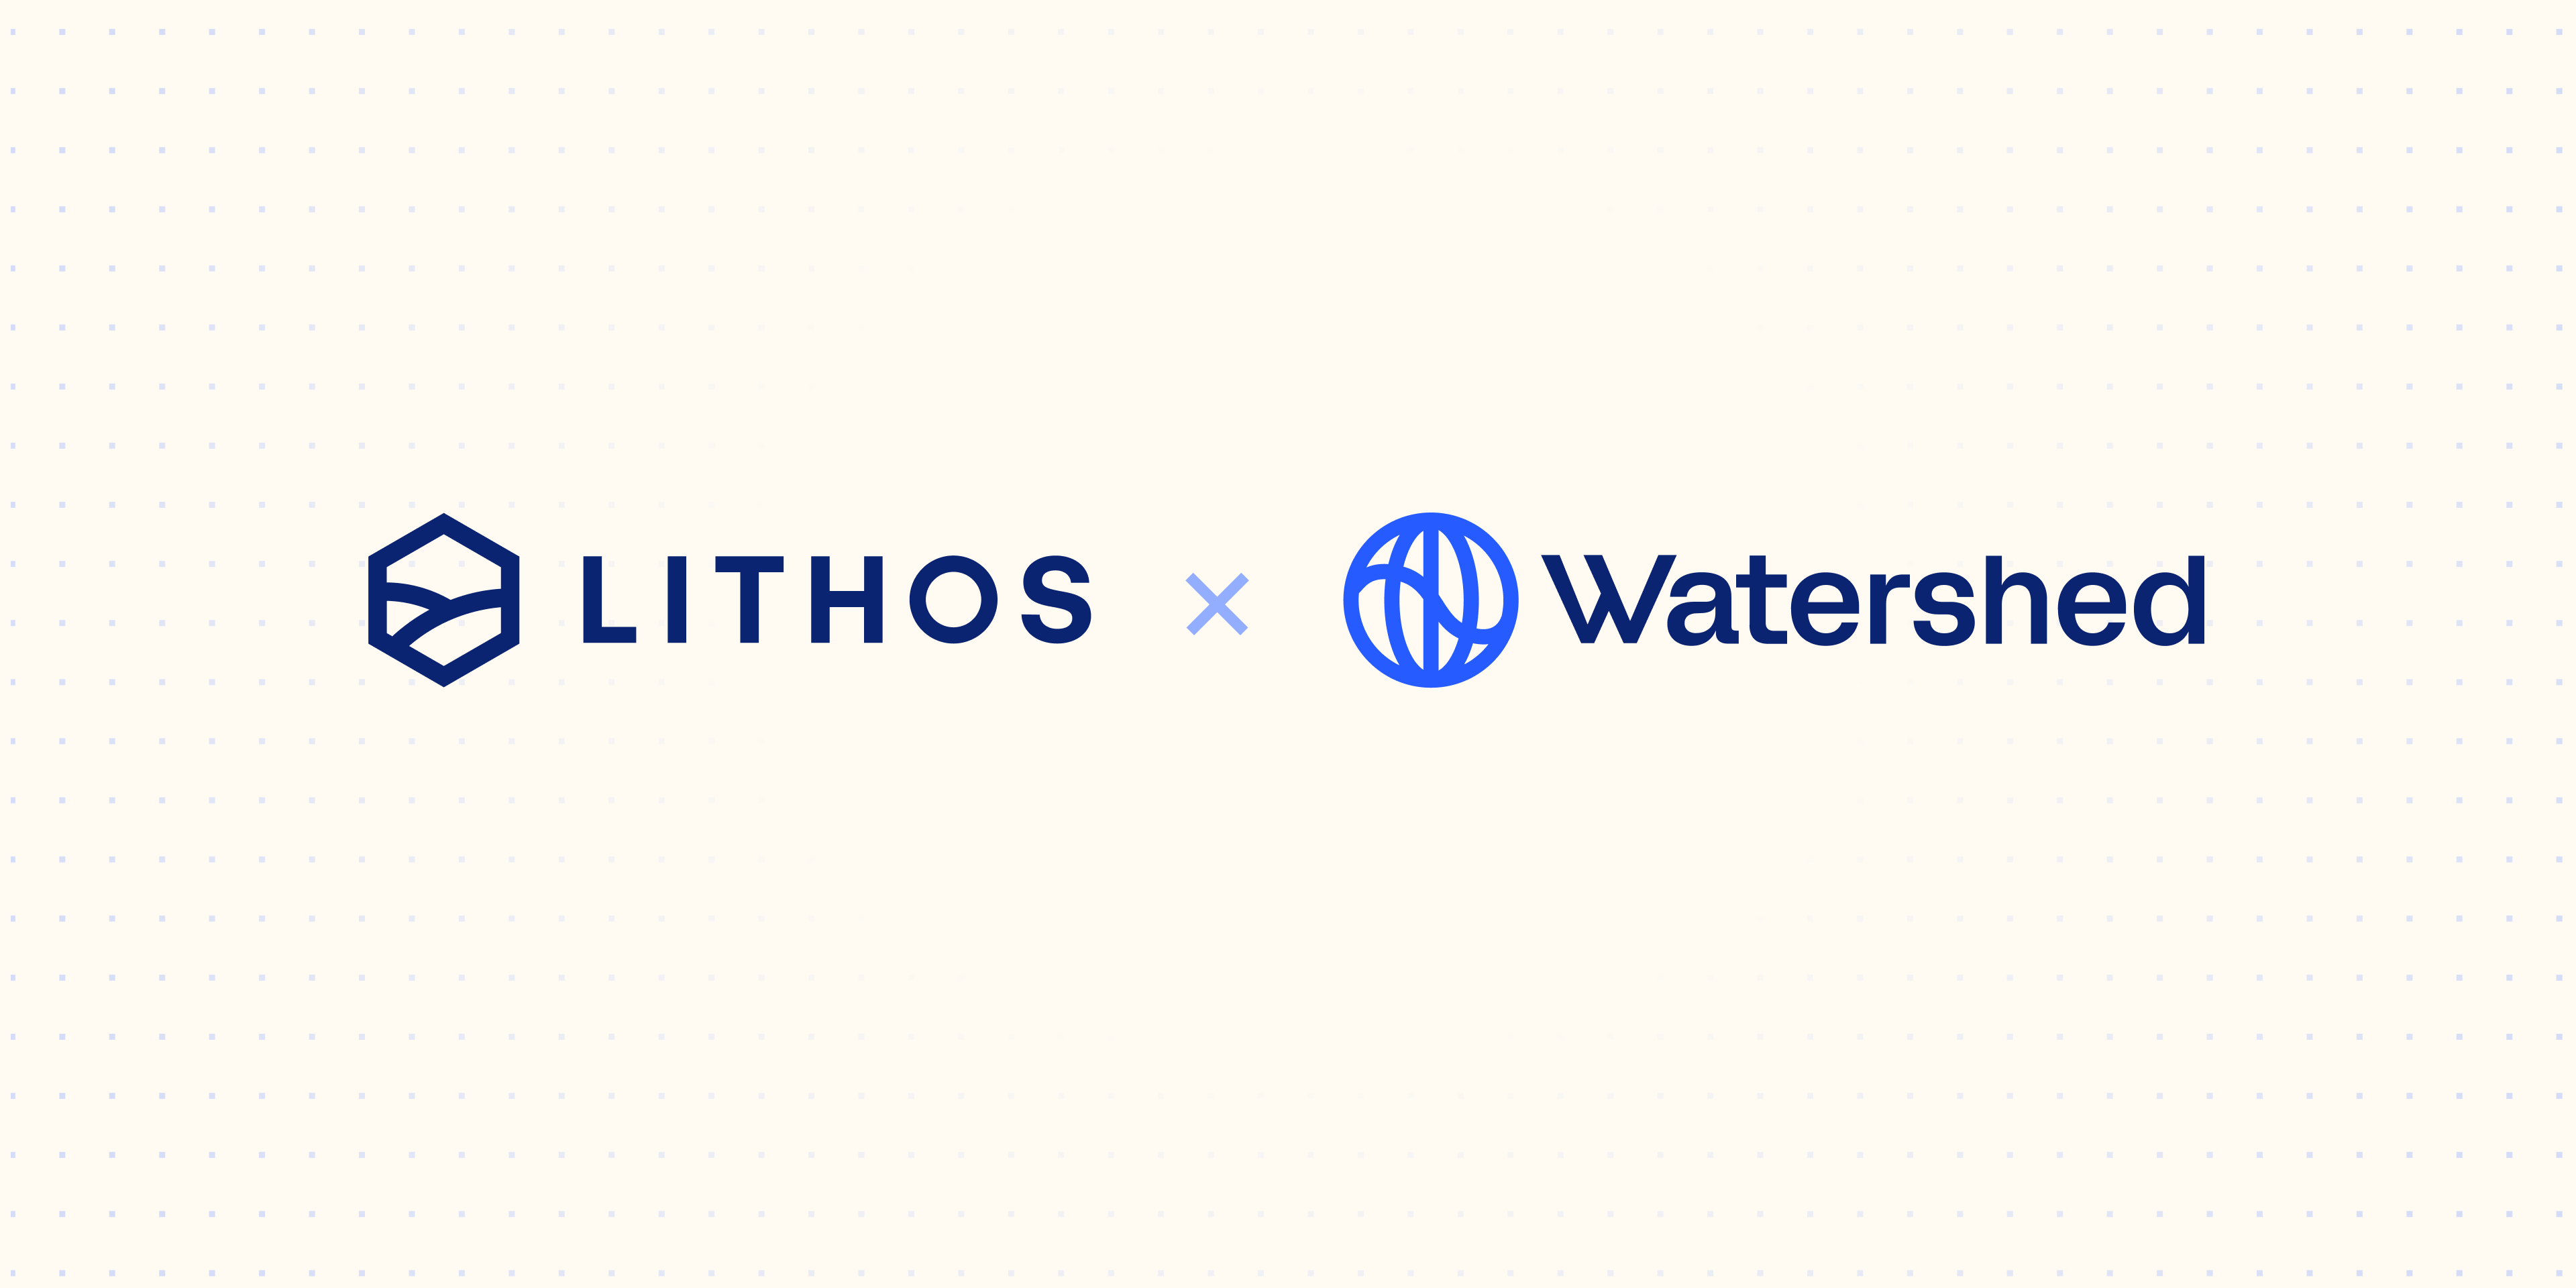 Lithos and Watershed logos